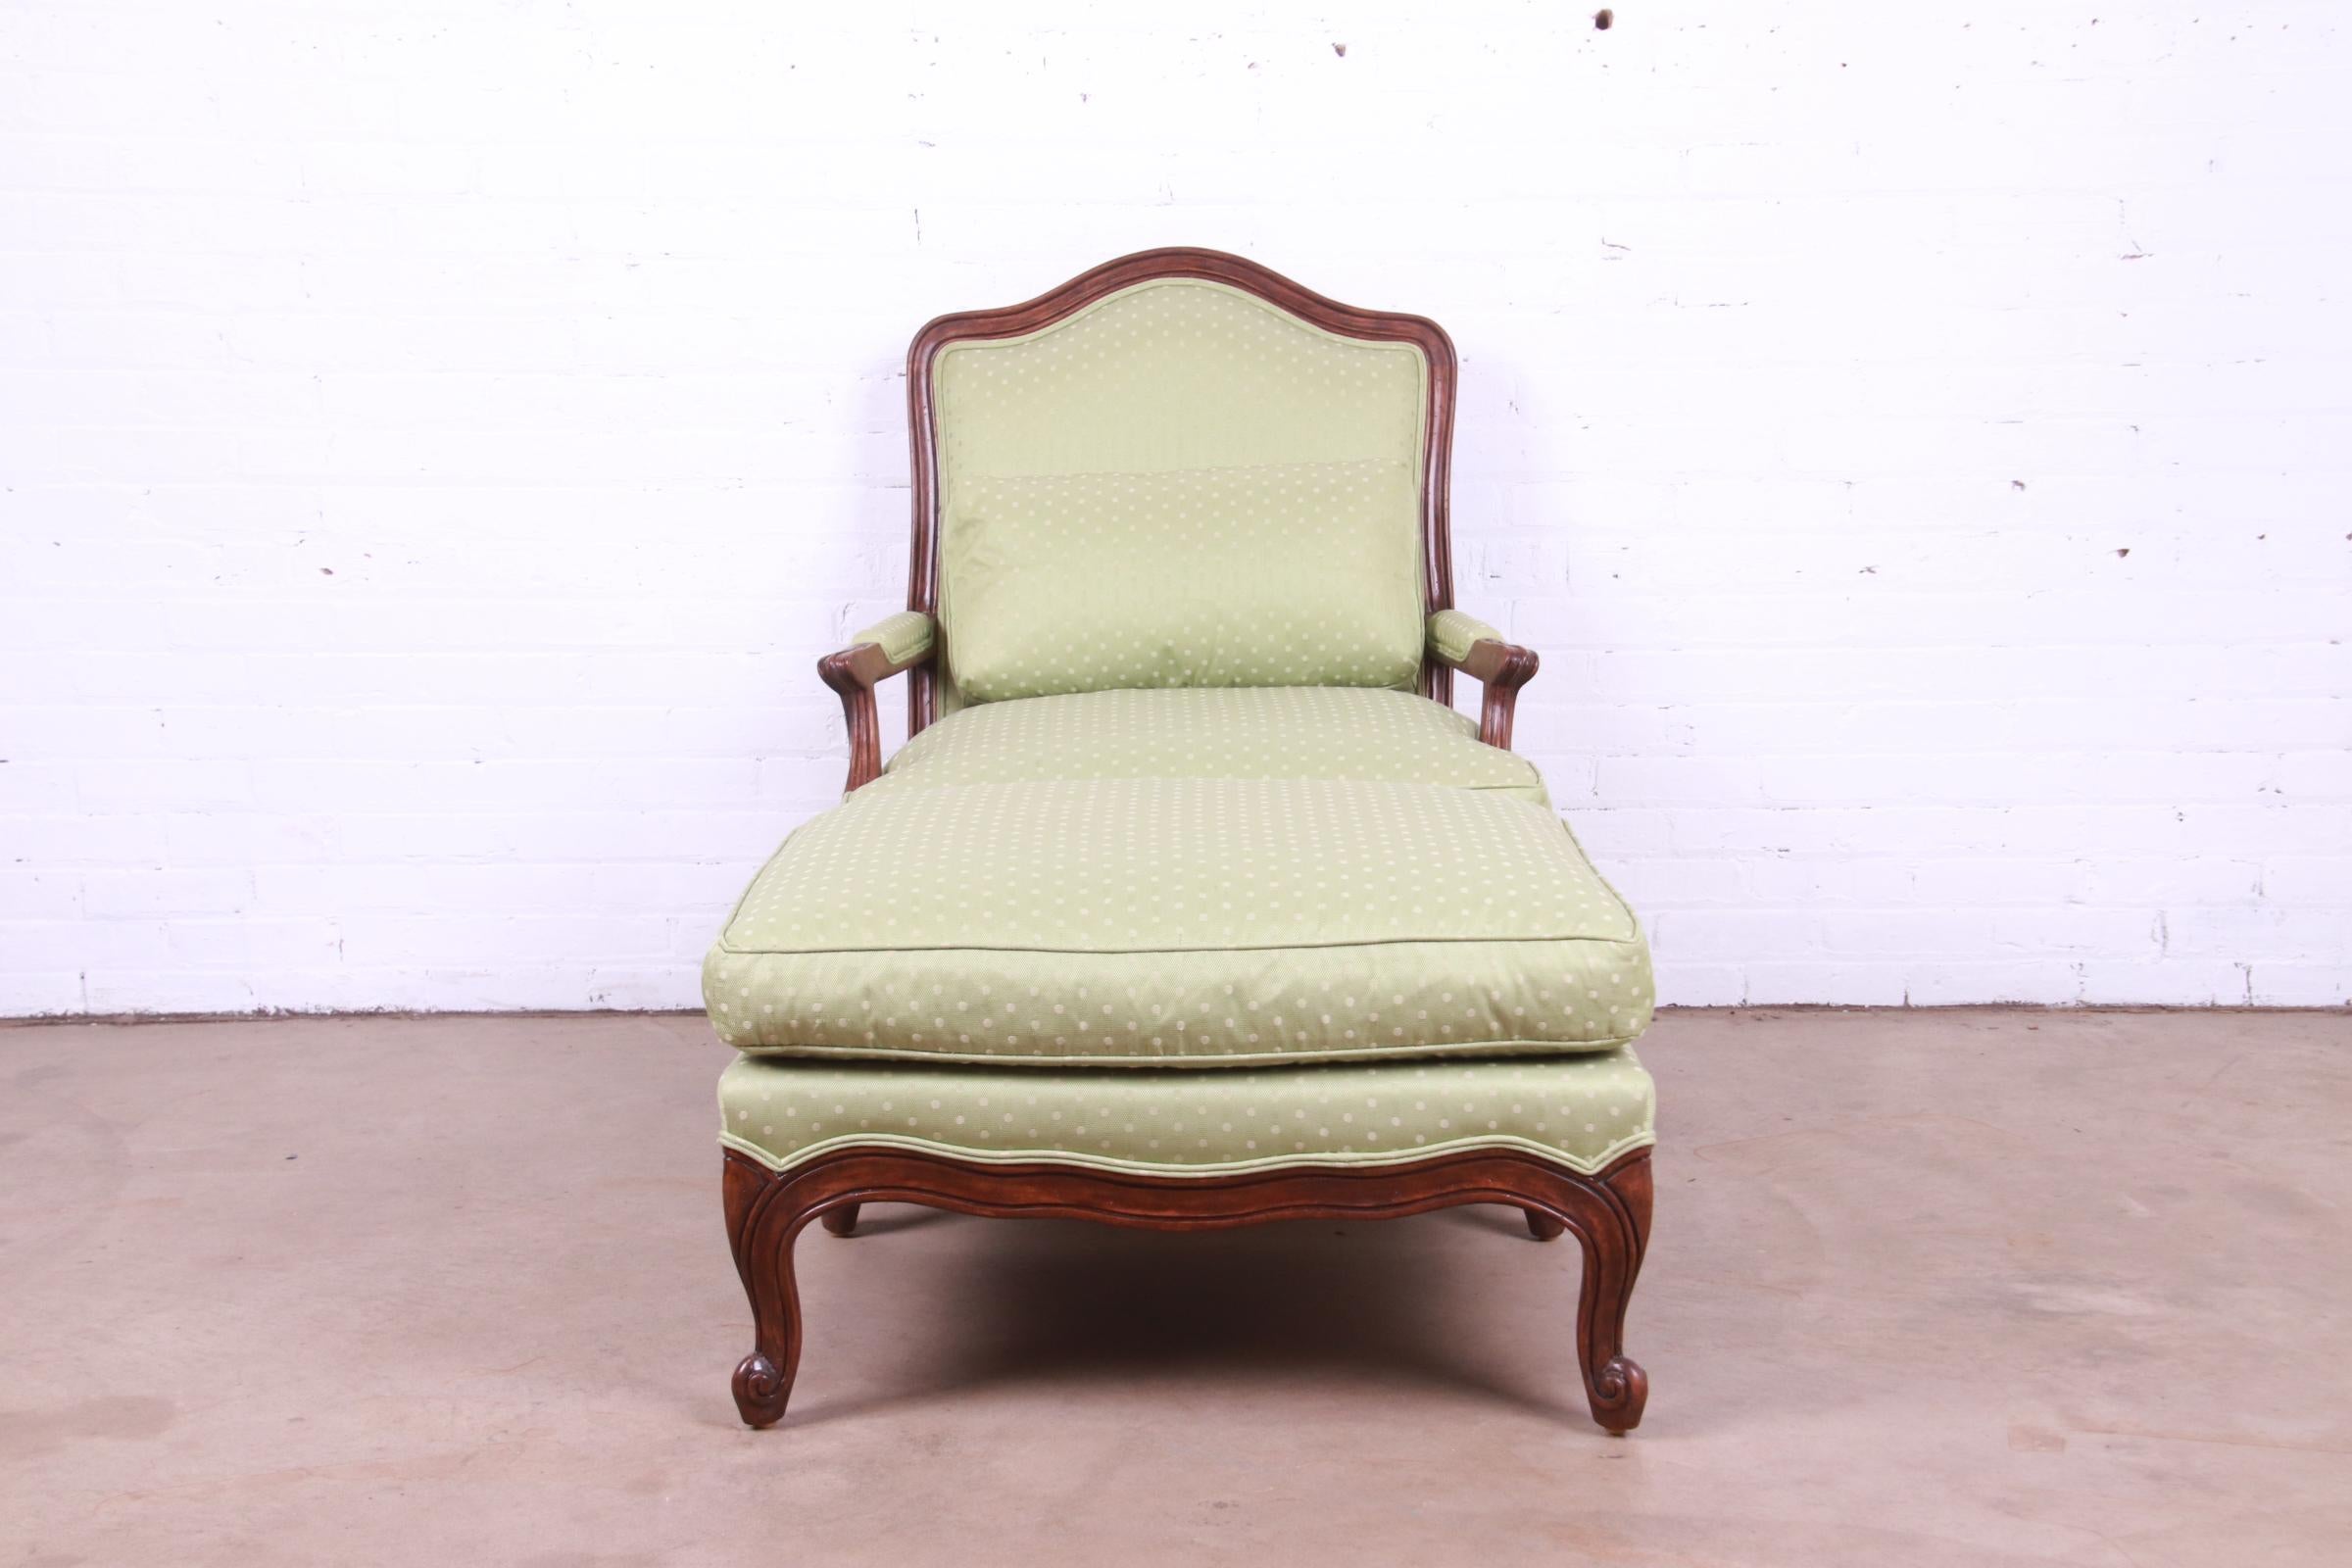 Minton-Spidell French Provincial Carved Walnut Upholstered Fauteuil with Ottoman For Sale 1